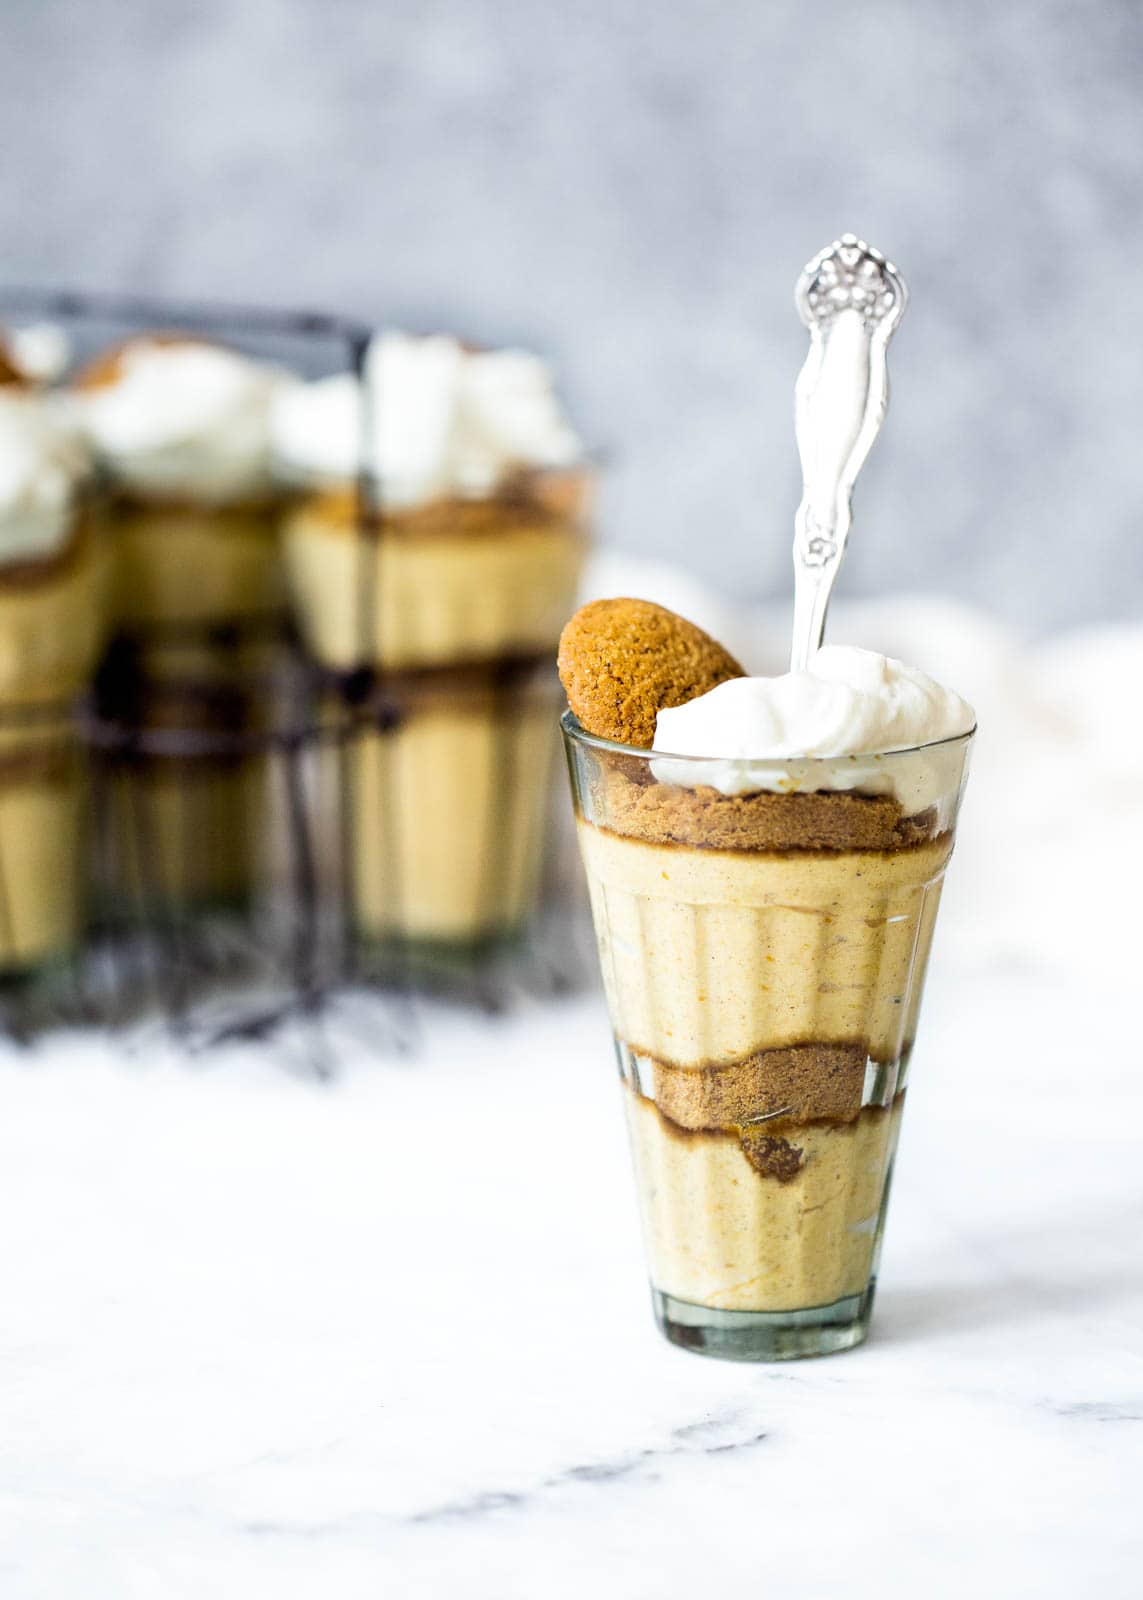 No bake, no stress! These creamy crème fraîche pumpkin mousse cups are an easy peasy dessert for the holidays.